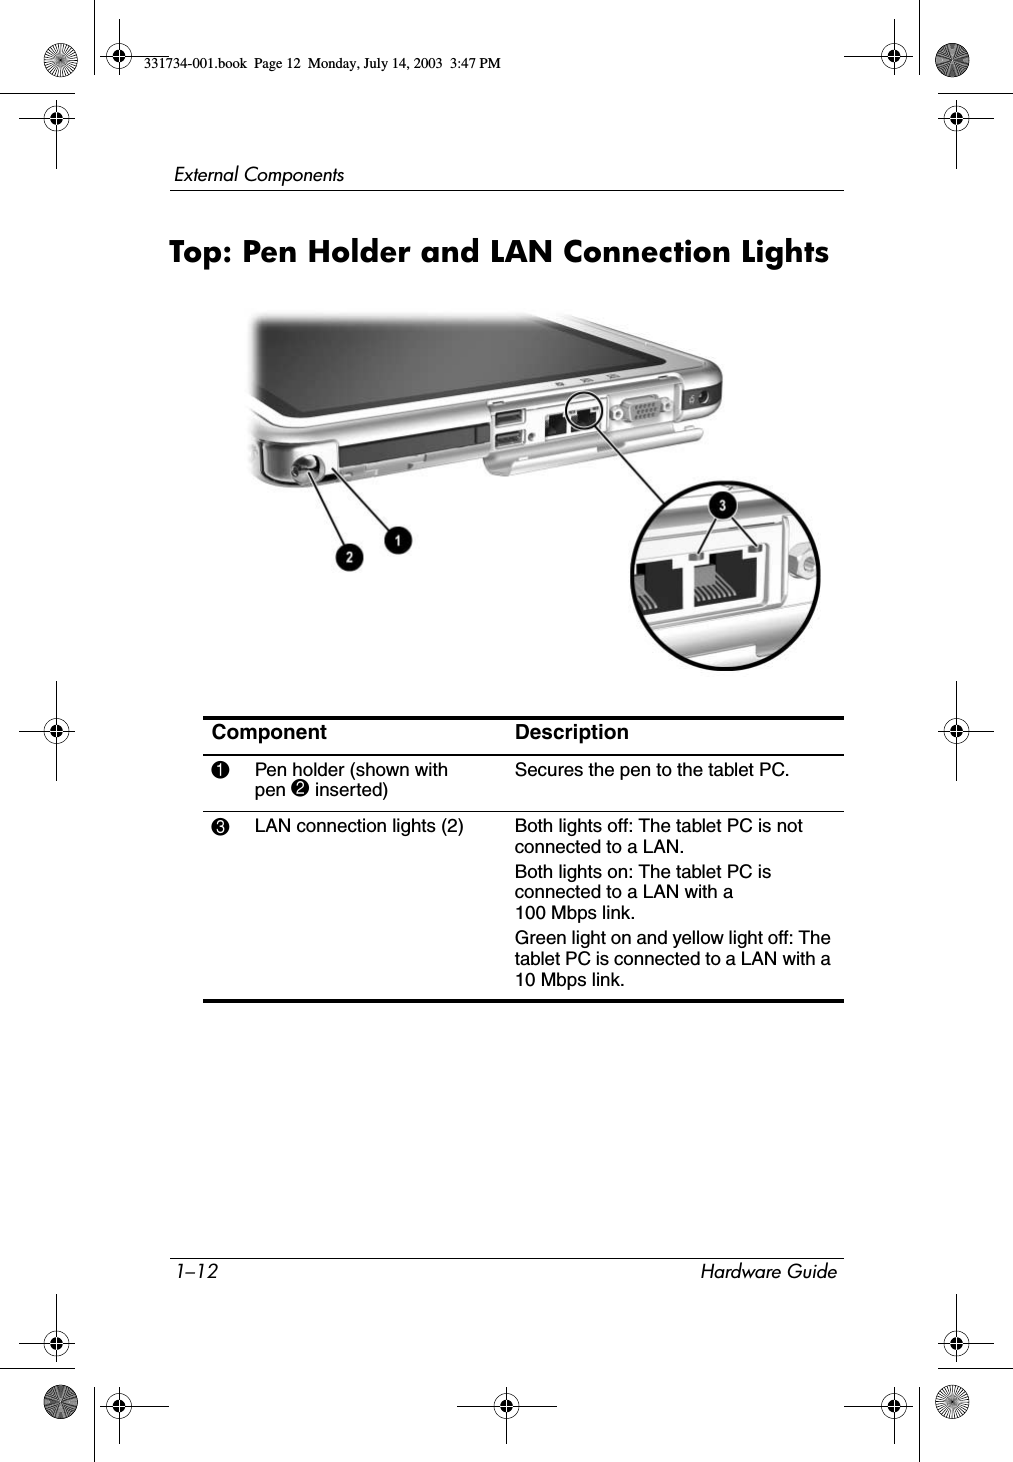 1–12 Hardware GuideExternal ComponentsTop: Pen Holder and LAN Connection LightsComponent Description1Pen holder (shown with pen 2 inserted)Secures the pen to the tablet PC.3LAN connection lights (2) Both lights off: The tablet PC is not connected to a LAN.Both lights on: The tablet PC is connected to a LAN with a 100 Mbps link.Green light on and yellow light off: The tablet PC is connected to a LAN with a 10 Mbps link.331734-001.book  Page 12  Monday, July 14, 2003  3:47 PM